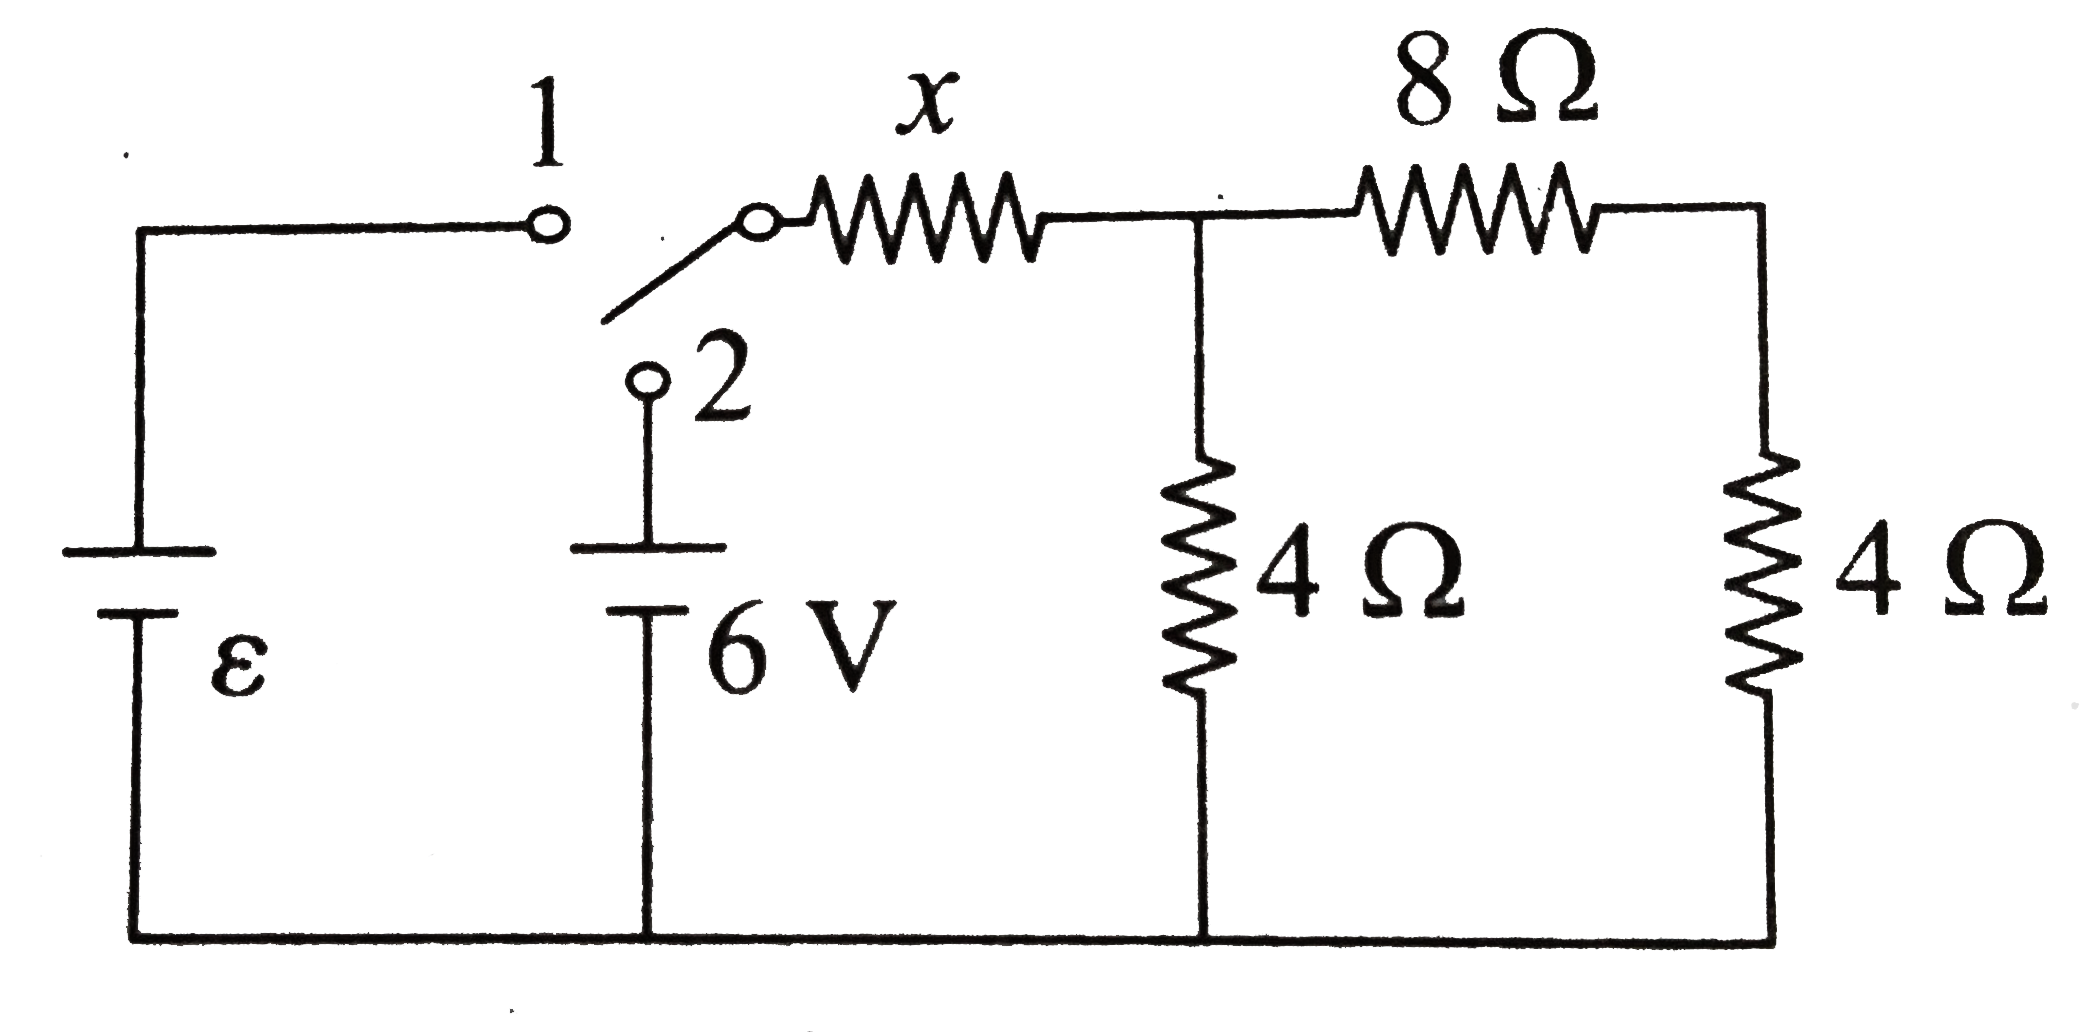 When the switch 1 is closed, the current through the 8 Omega resistance is 0.75A. When the switch 2 is closed (only), the current through the resistance marked x is 1 A. The value of x is